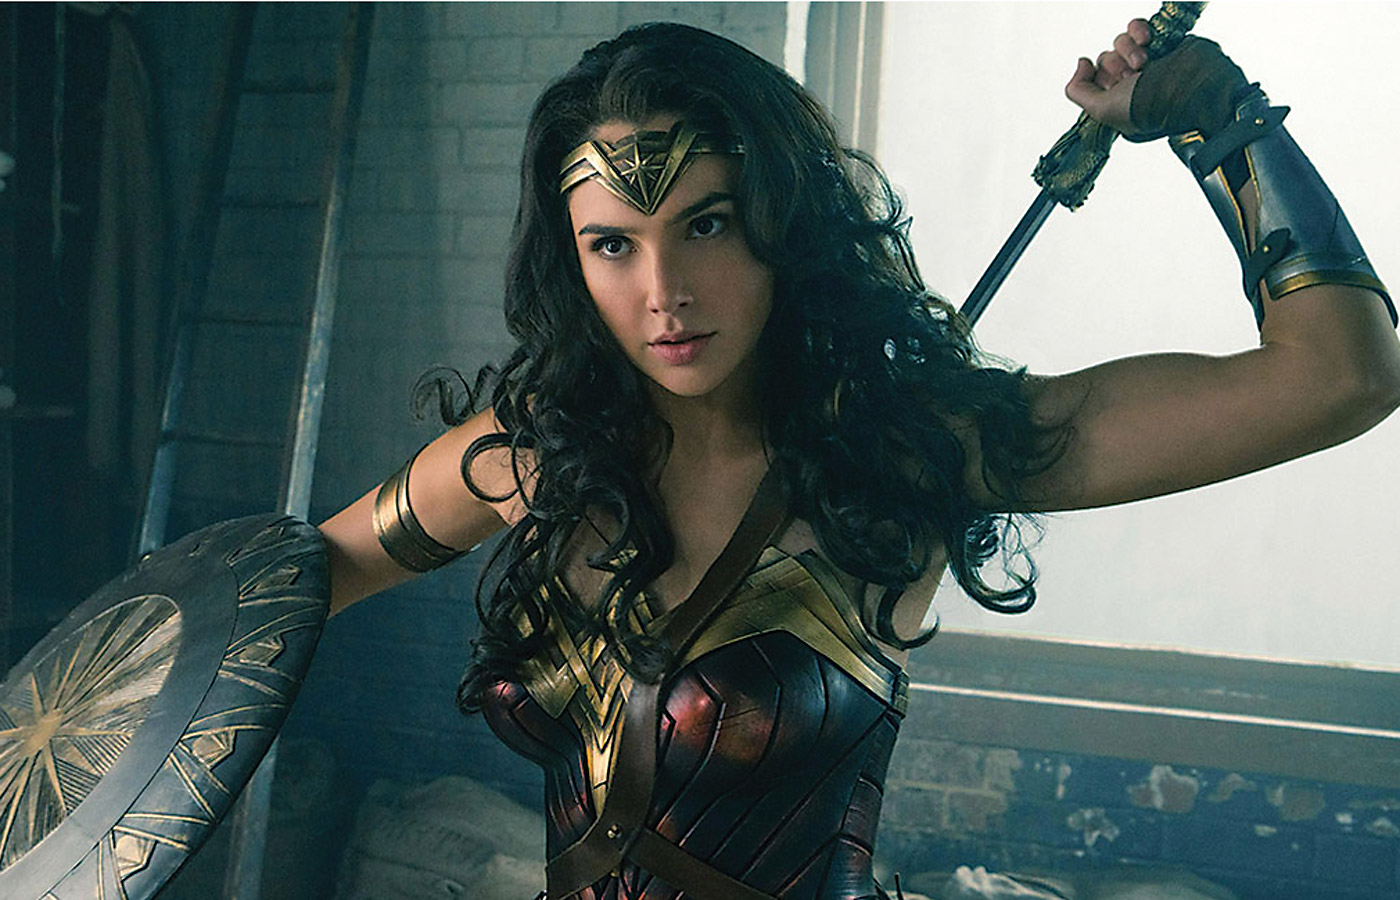 Wonder Woman: We’re Rooting For You! - Iowa Source